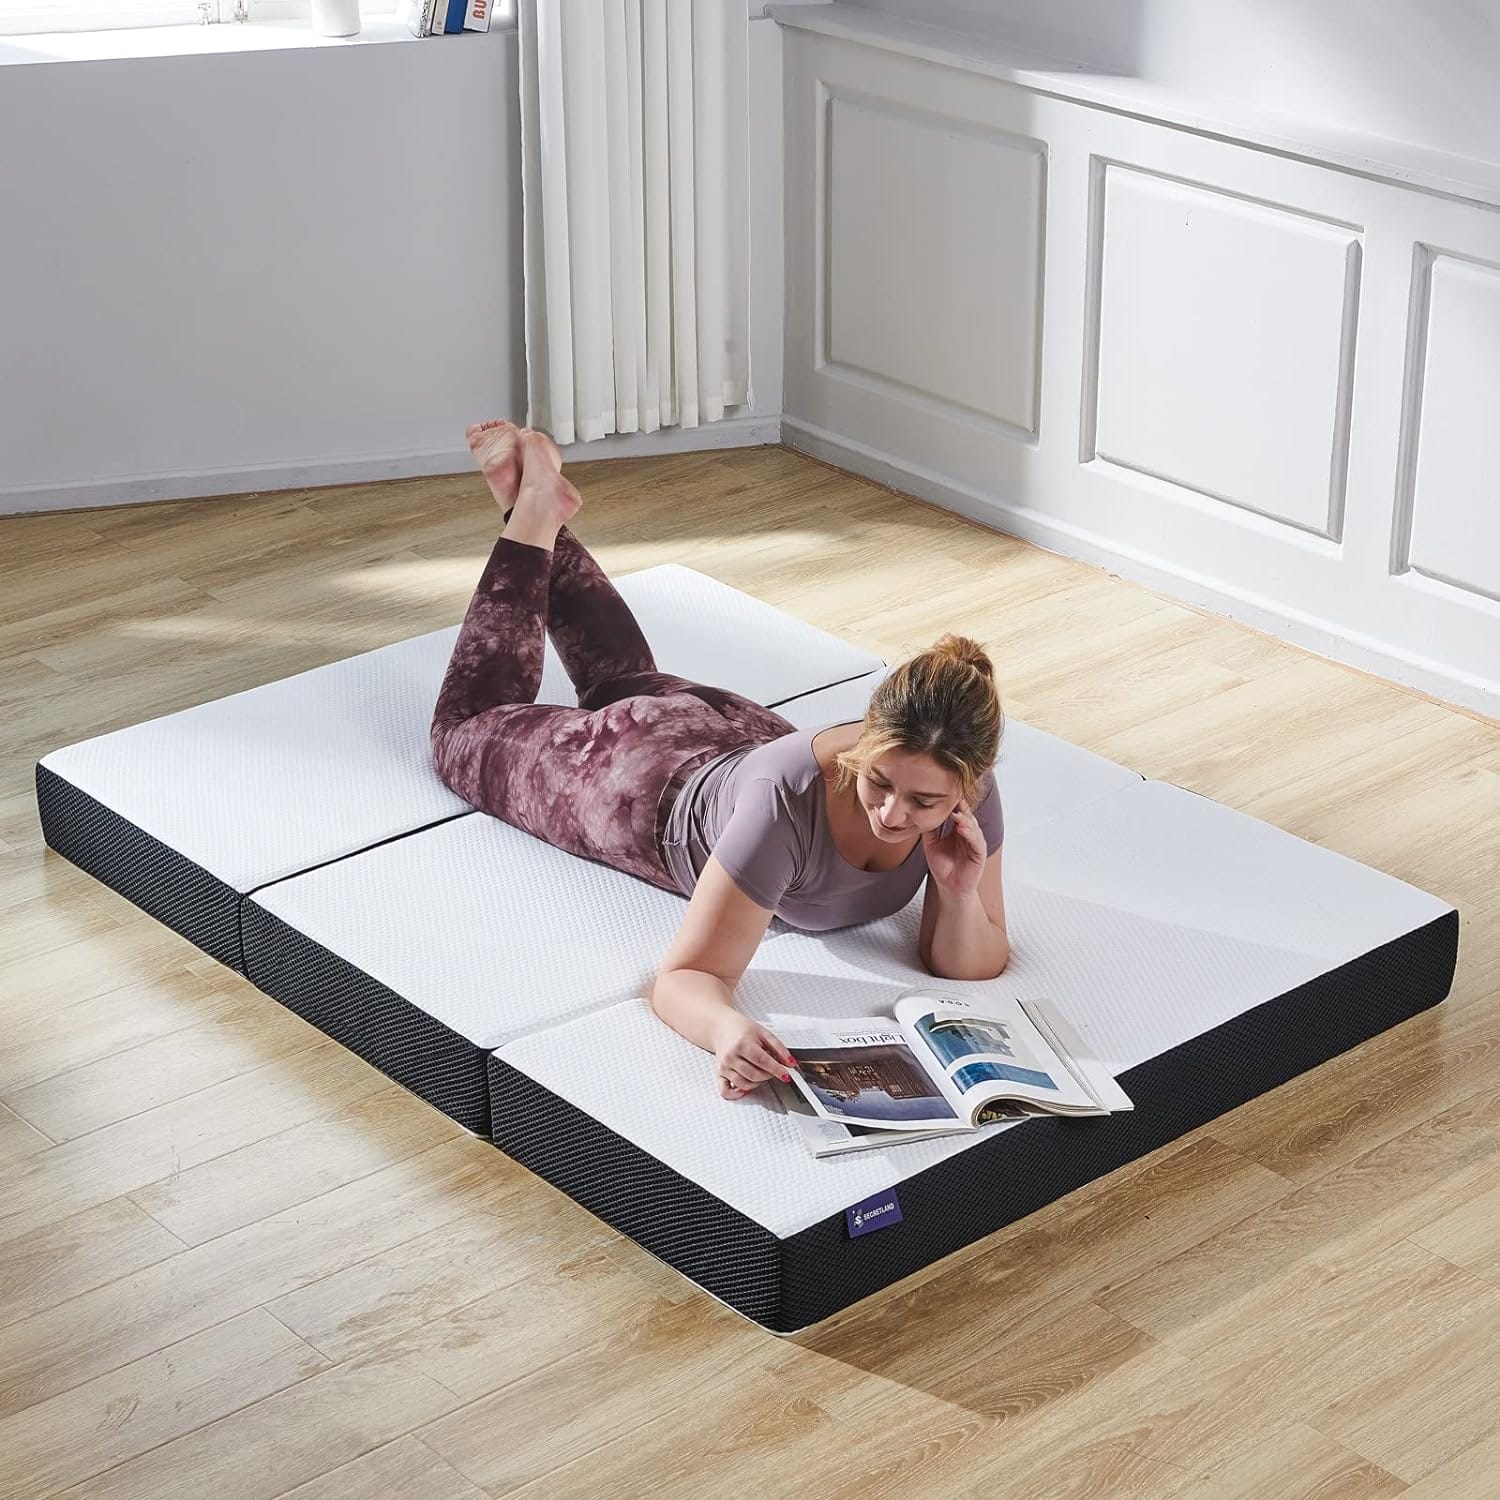 s secretland folding mattress 3 inch tri fold memory foam mattress topper with washable cover foldable mattress topper f 3 - S SECRETLAND Mattress Review: Portable Comfort for Any Space